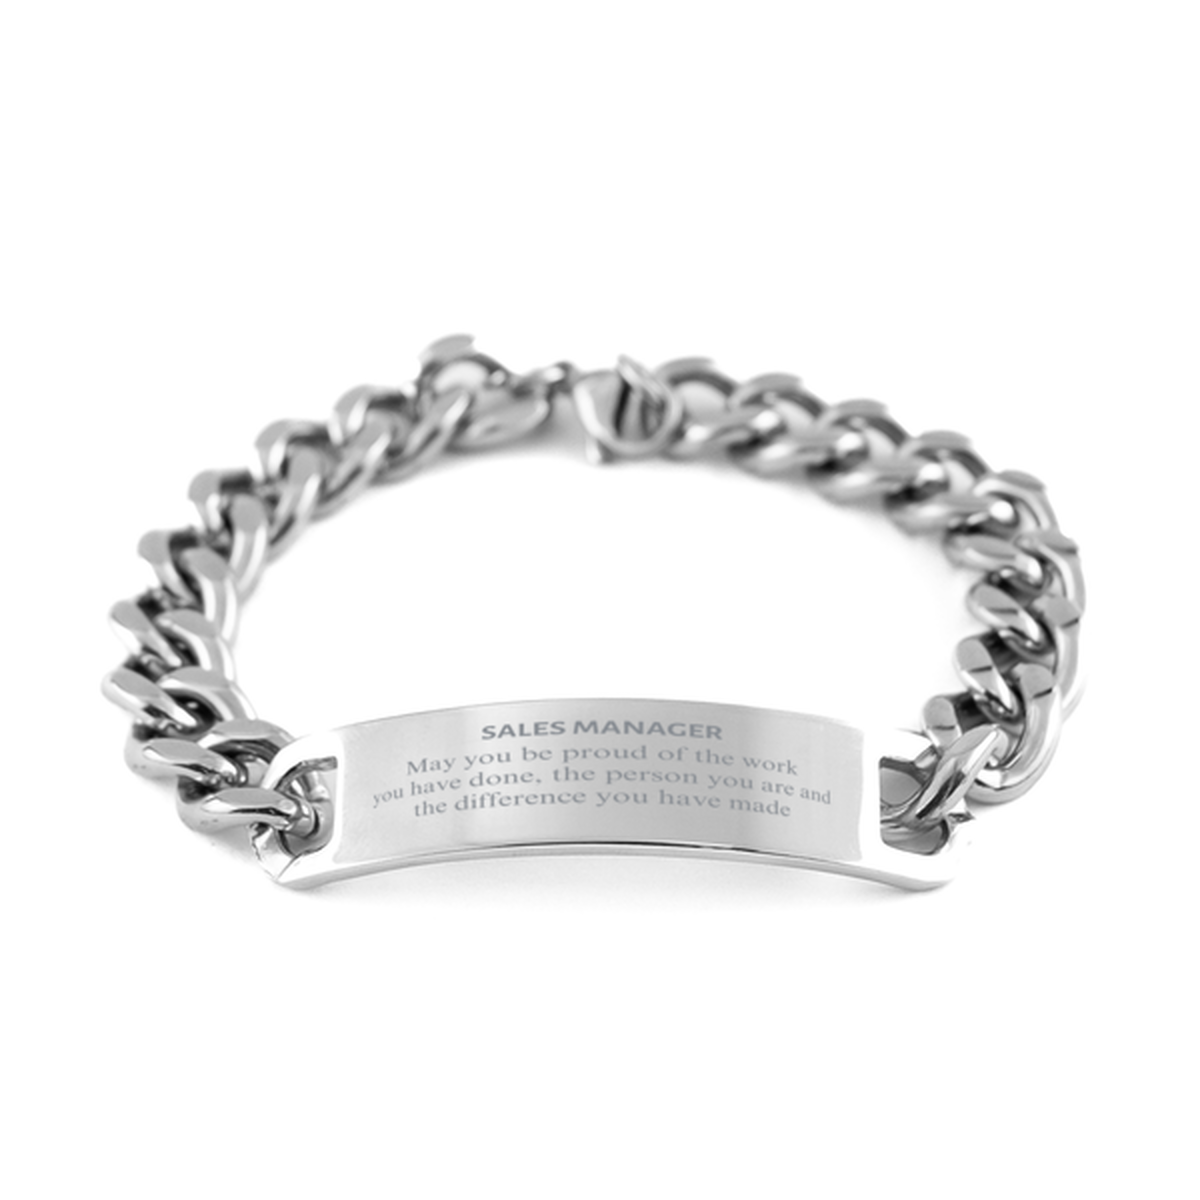 Sales Manager May you be proud of the work you have done, Retirement Sales Manager Cuban Chain Stainless Steel Bracelet for Colleague Appreciation Gifts Amazing for Sales Manager